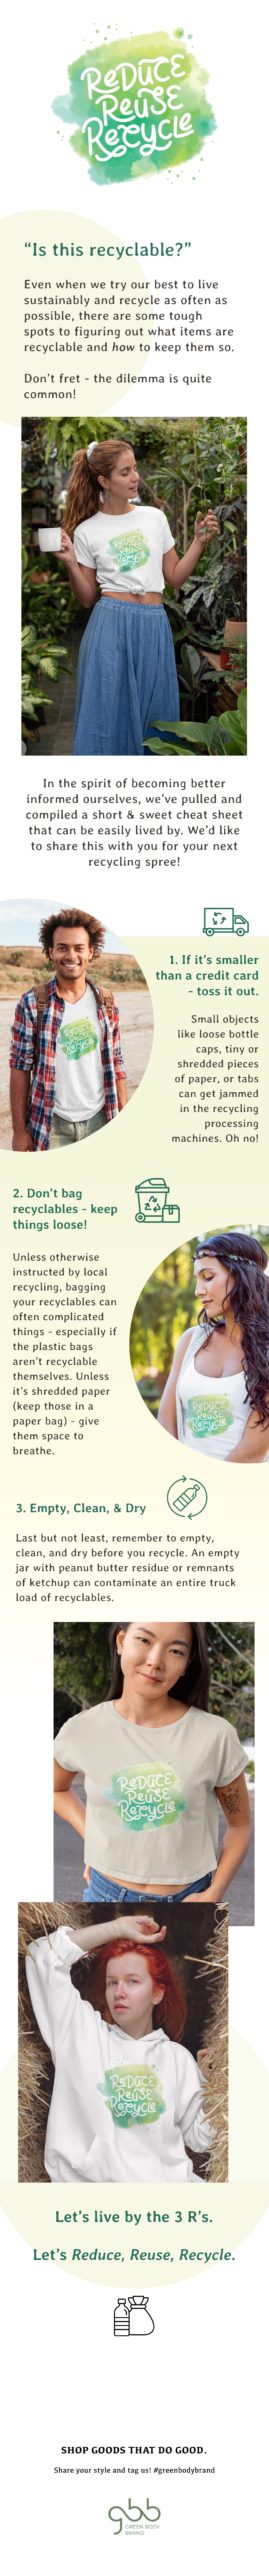 Reduce-Reuse-Recycle-Newsletter